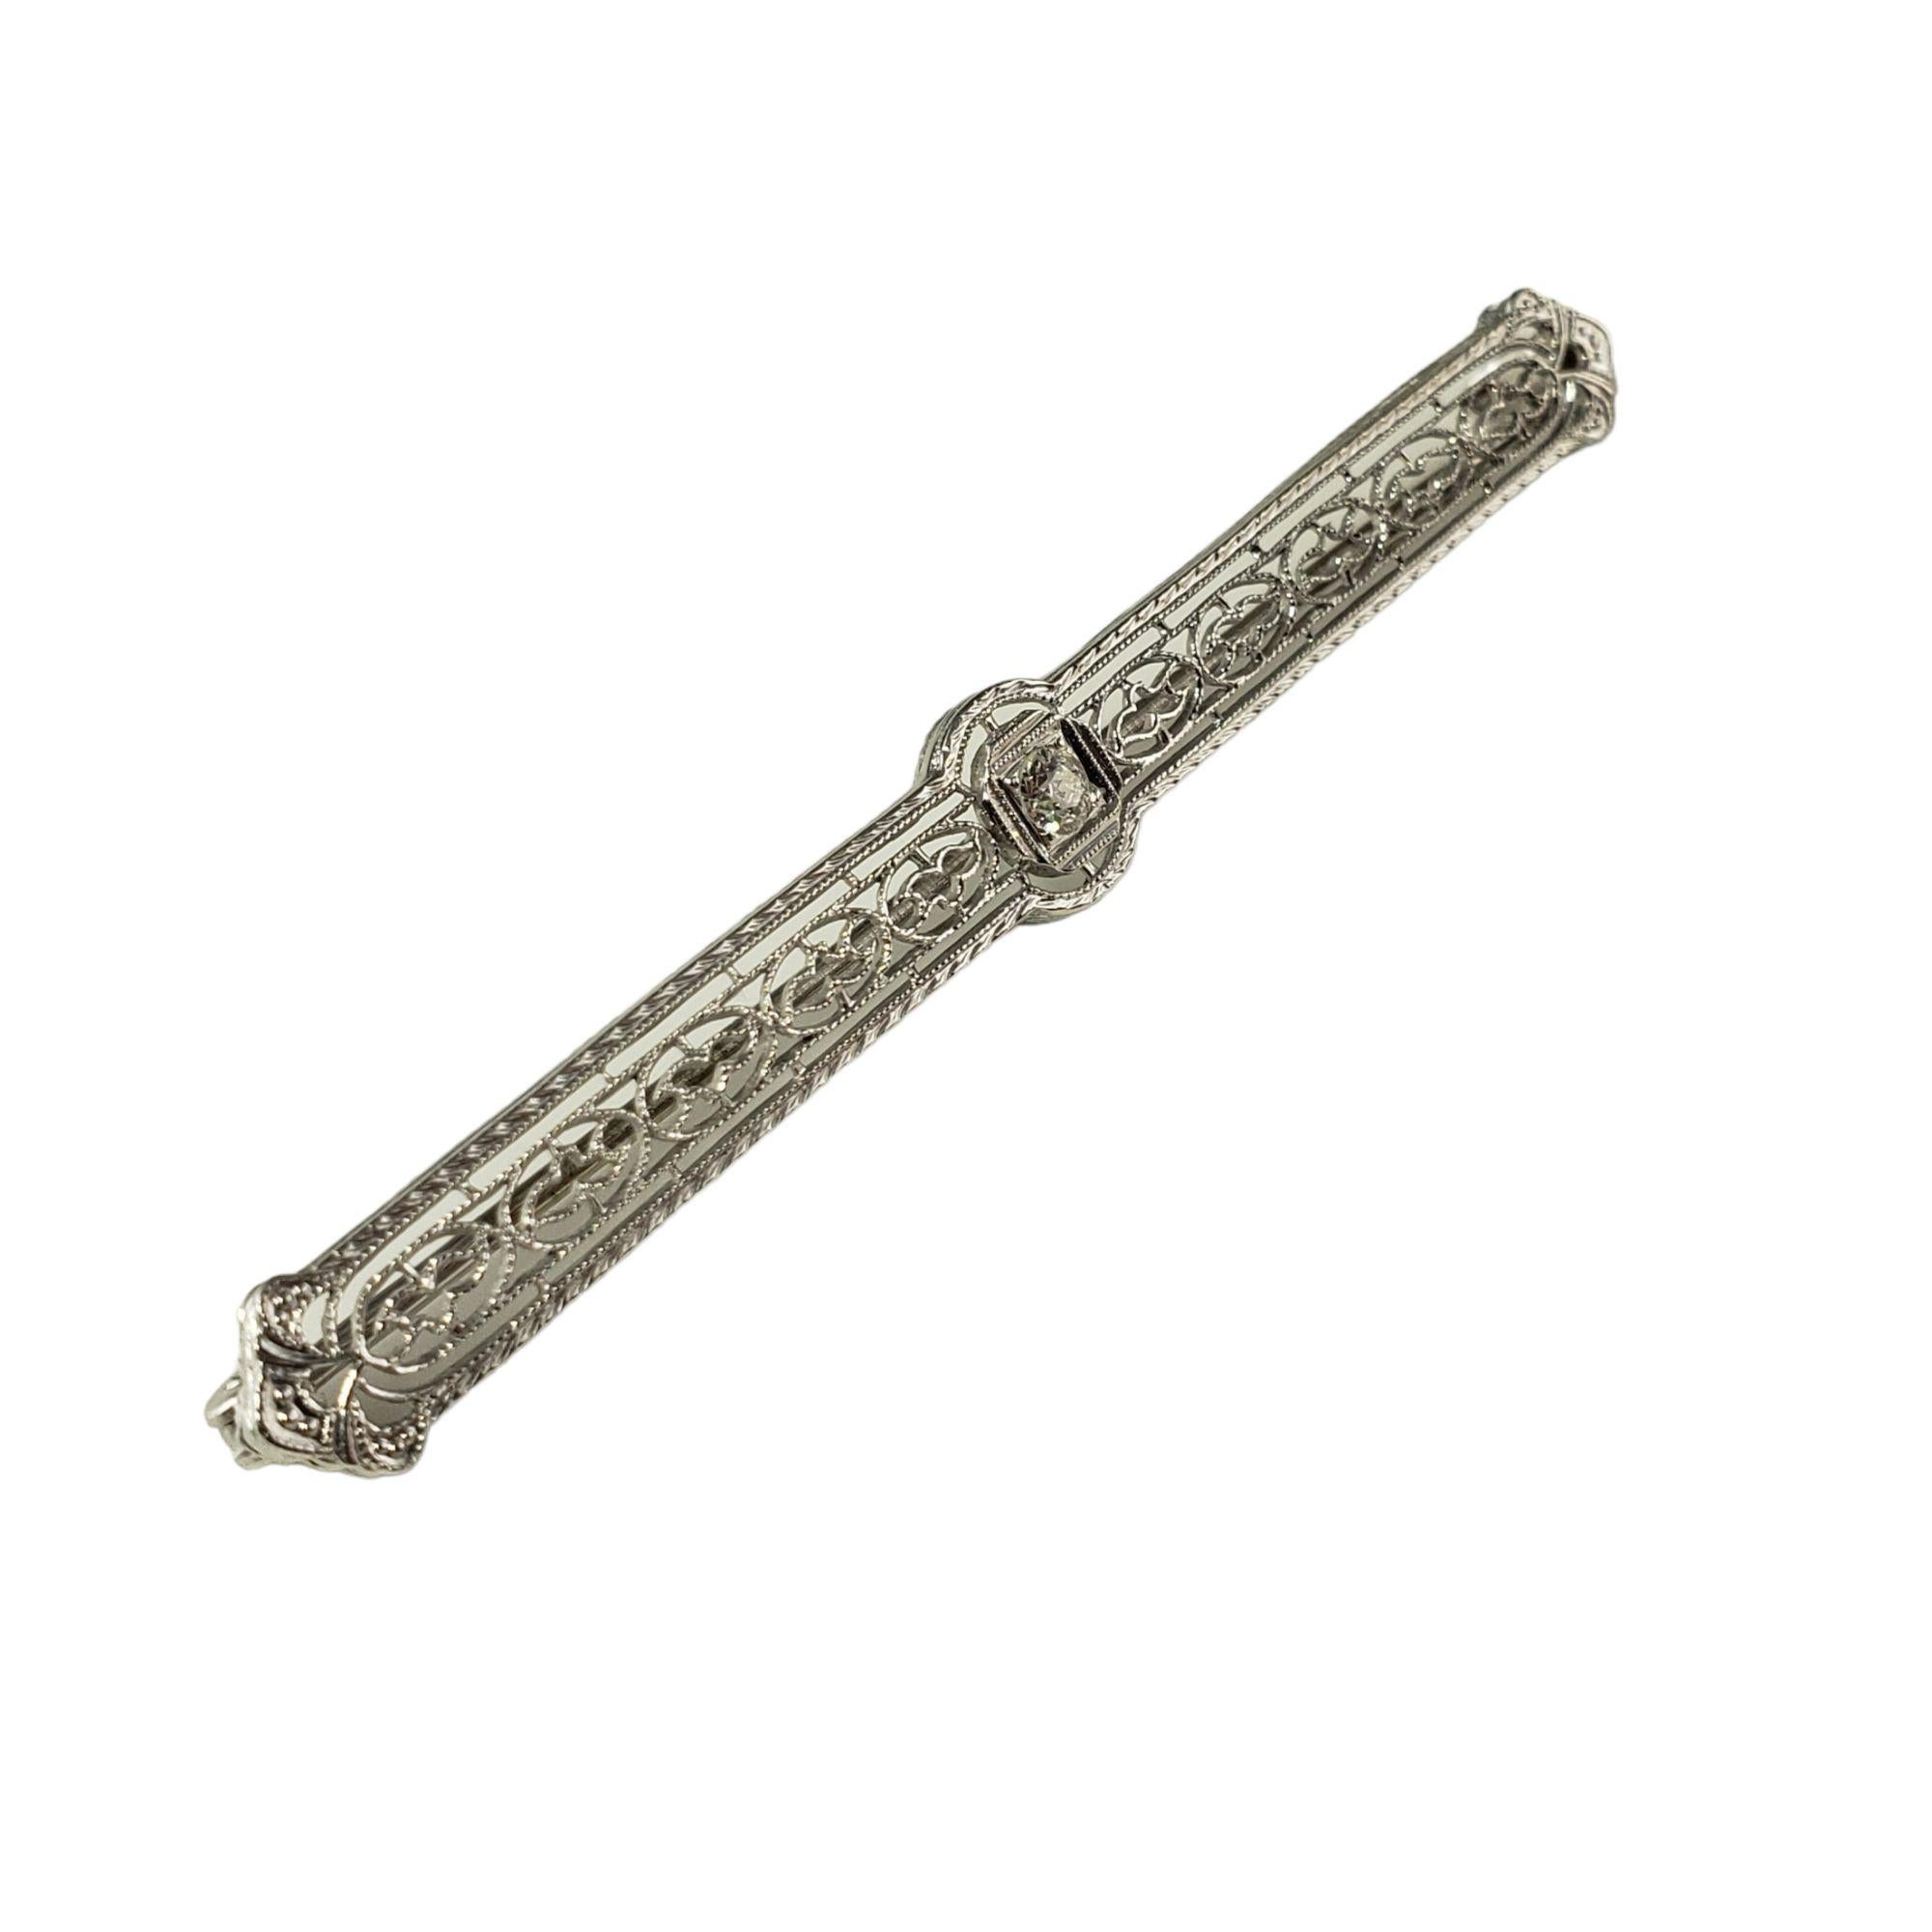 This elegant bar pin features one round brilliant cut diamond set in beautifully detailed 14K white gold filigree.  Width: 5 mm

Approximate diamond weight: .13 ct.

Diamond color: K

Diamond clarity: VS2

Size:  2.5 inches

Weight:  3.7 gr./  2.3